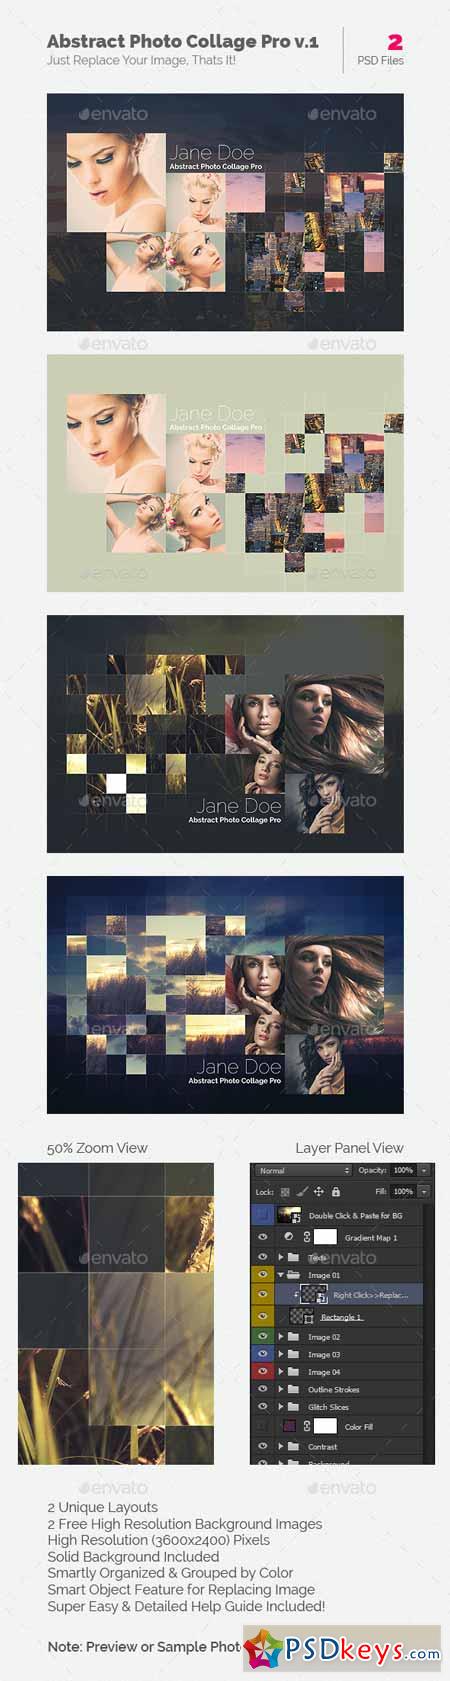 Abstract Photo Collage Pro v.1 10978512